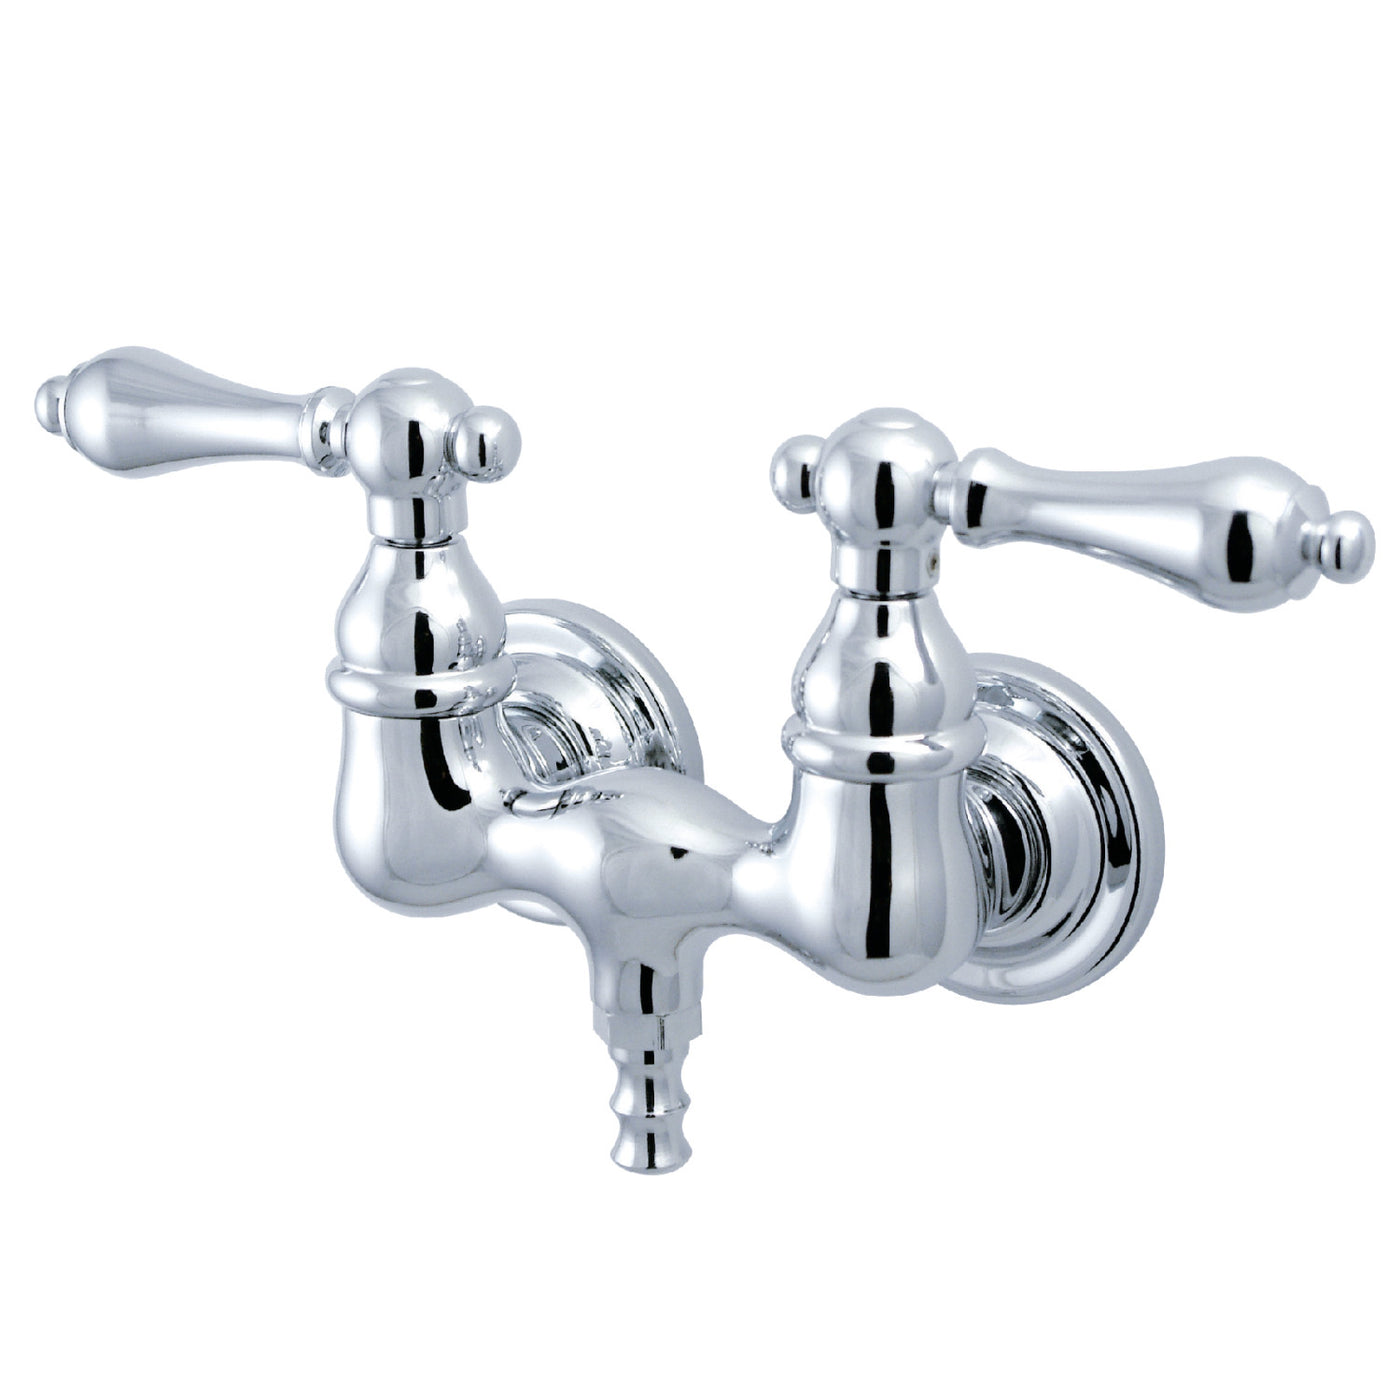 Elements of Design DT0321AL 3-3/8-Inch Wall Mount Tub Faucet, Polished Chrome